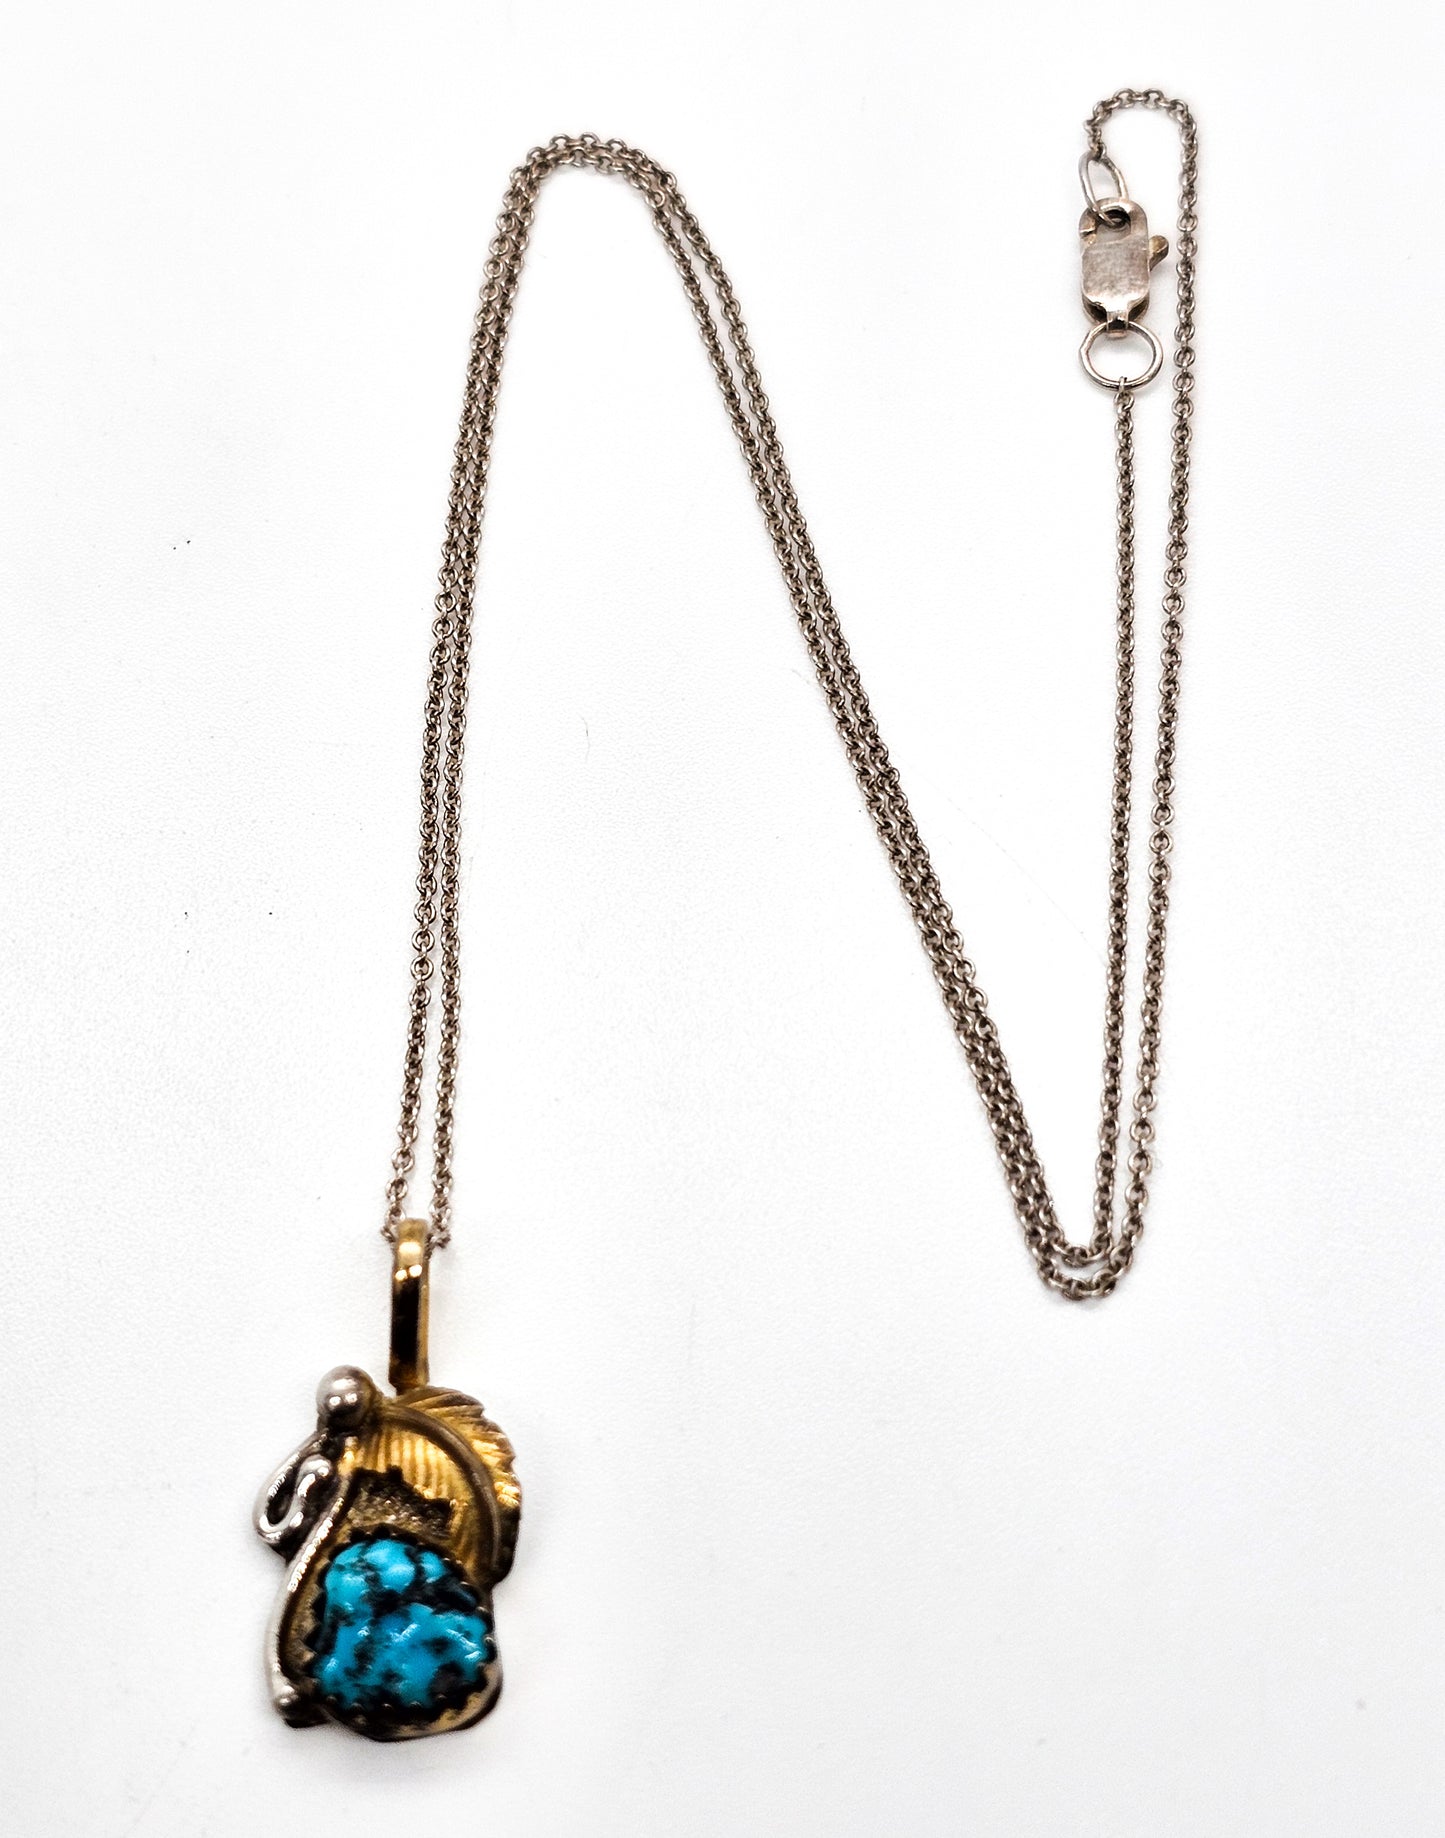 Virginia C Turquoise Native American Gold Filled Sterling Silver vintage pendant necklace